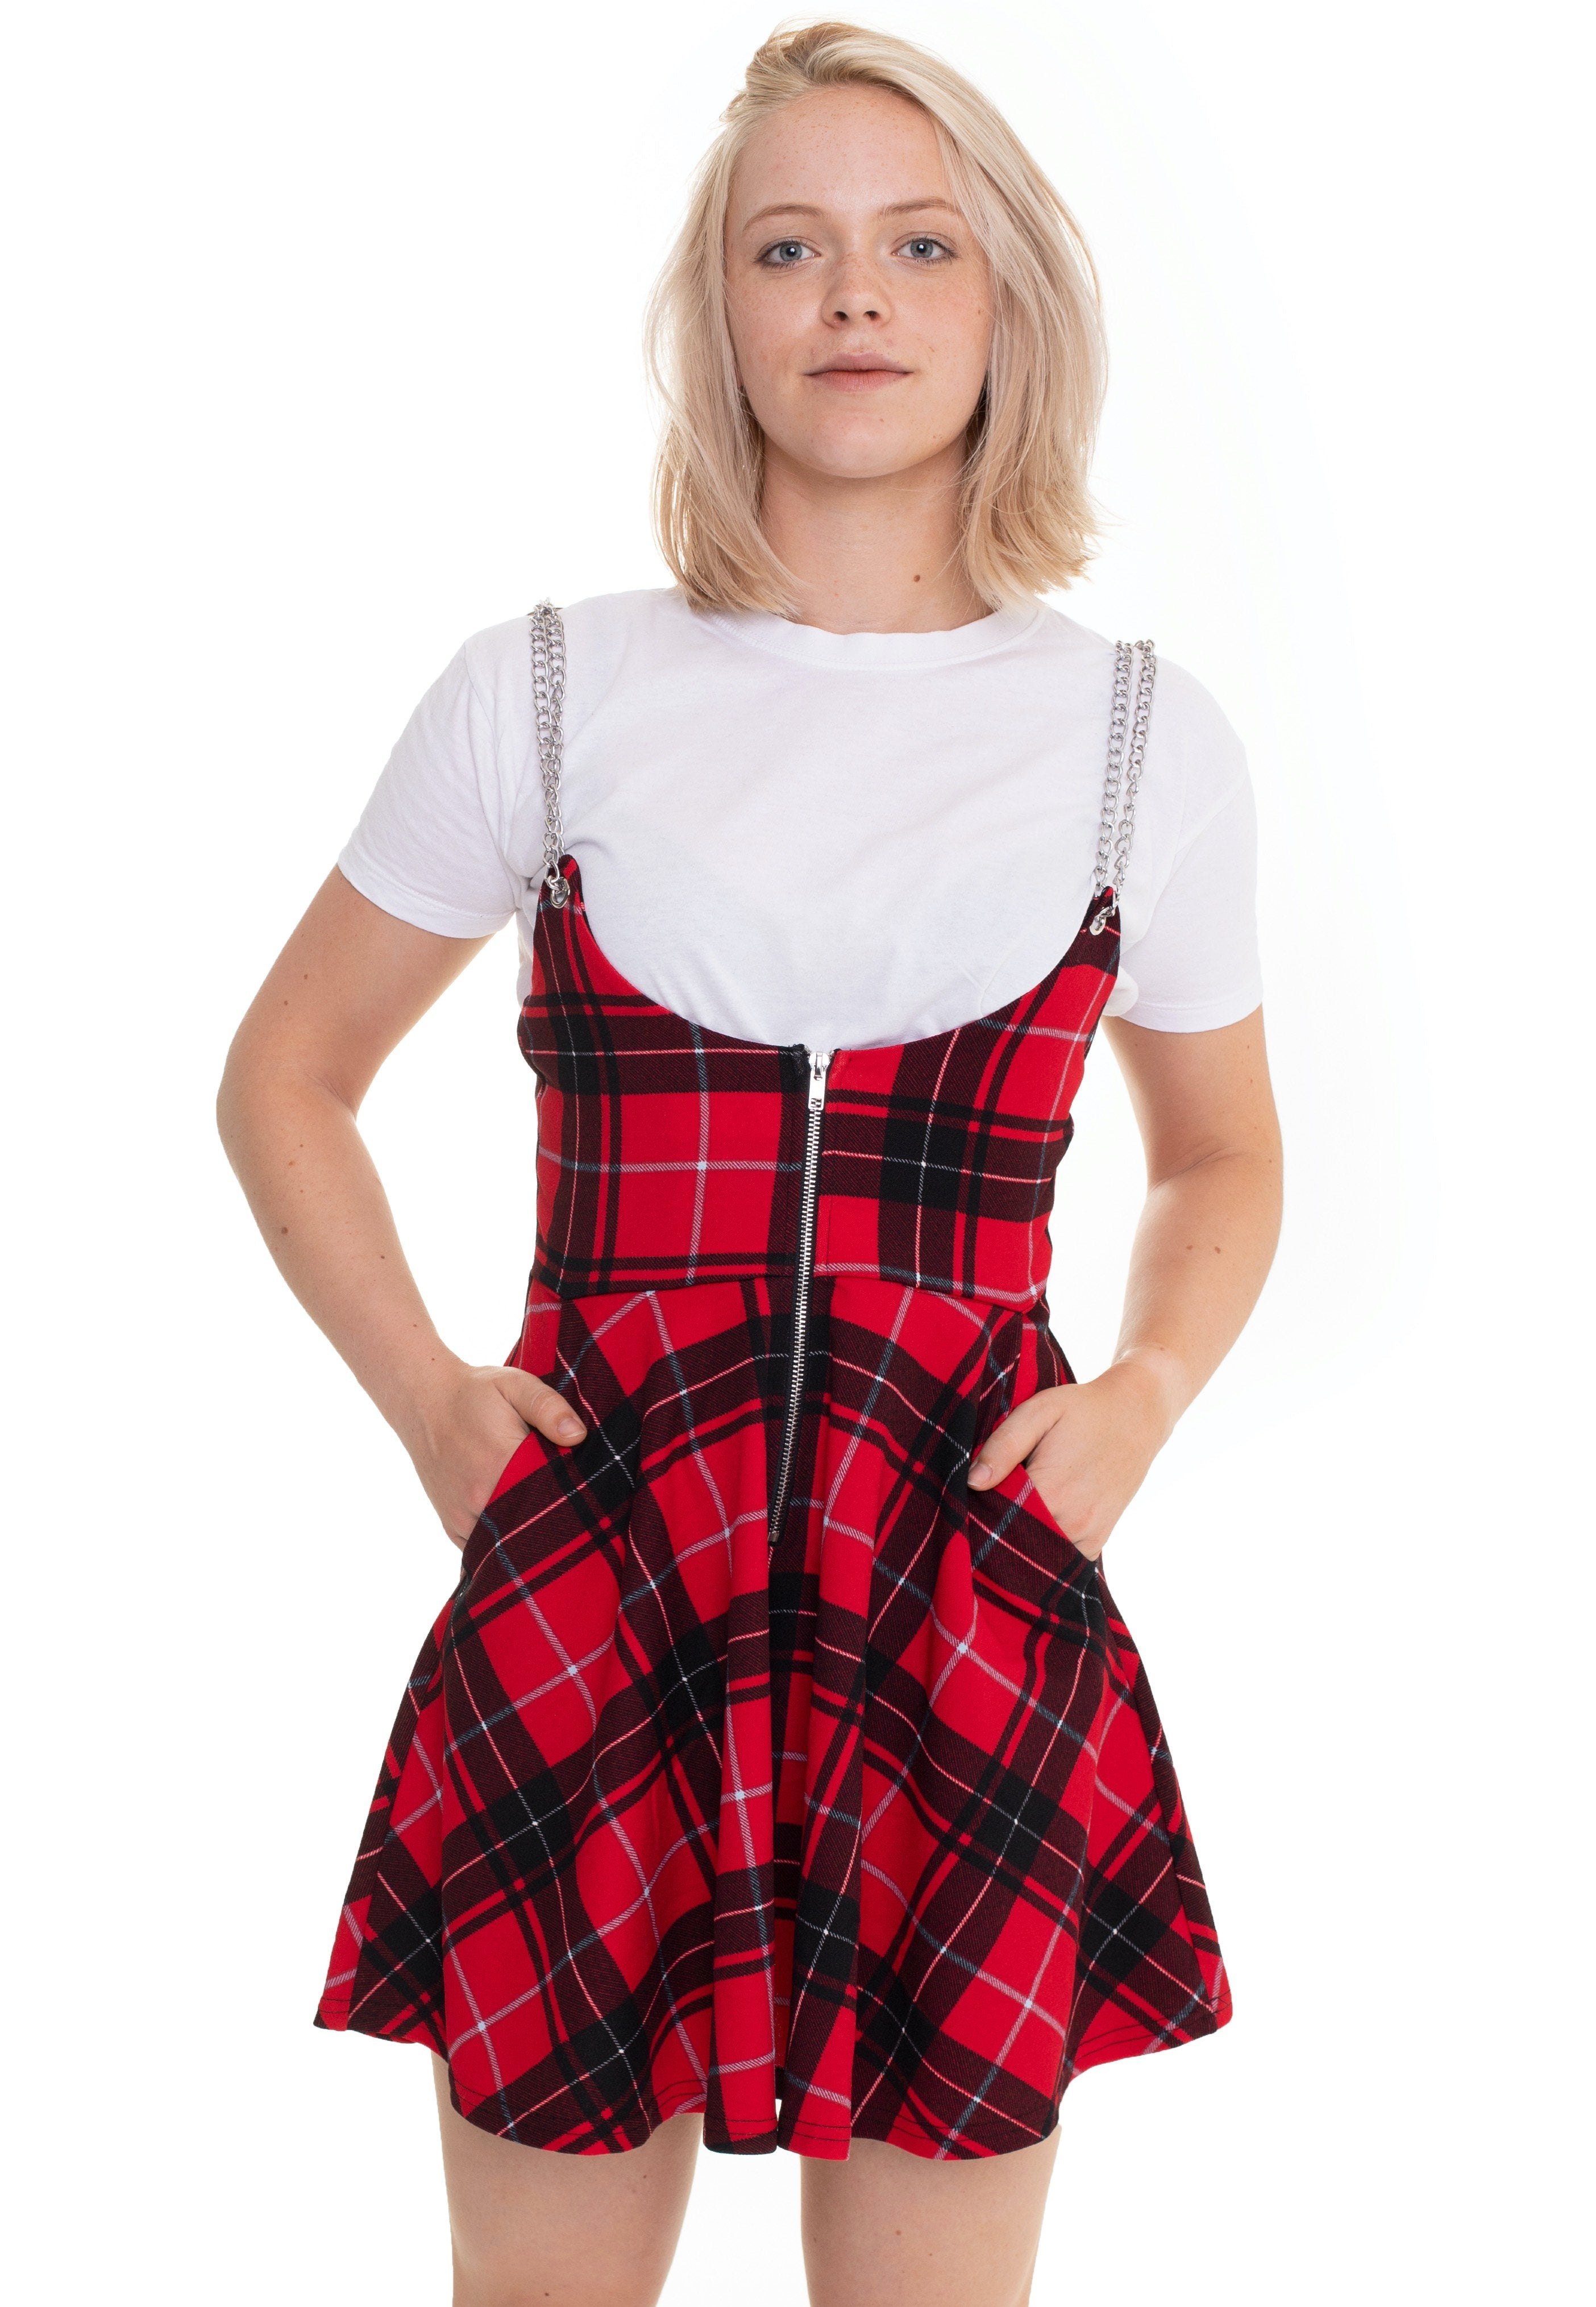 Jawbreaker - High Waisted With Chain Straps Red - Skirt | Women-Image